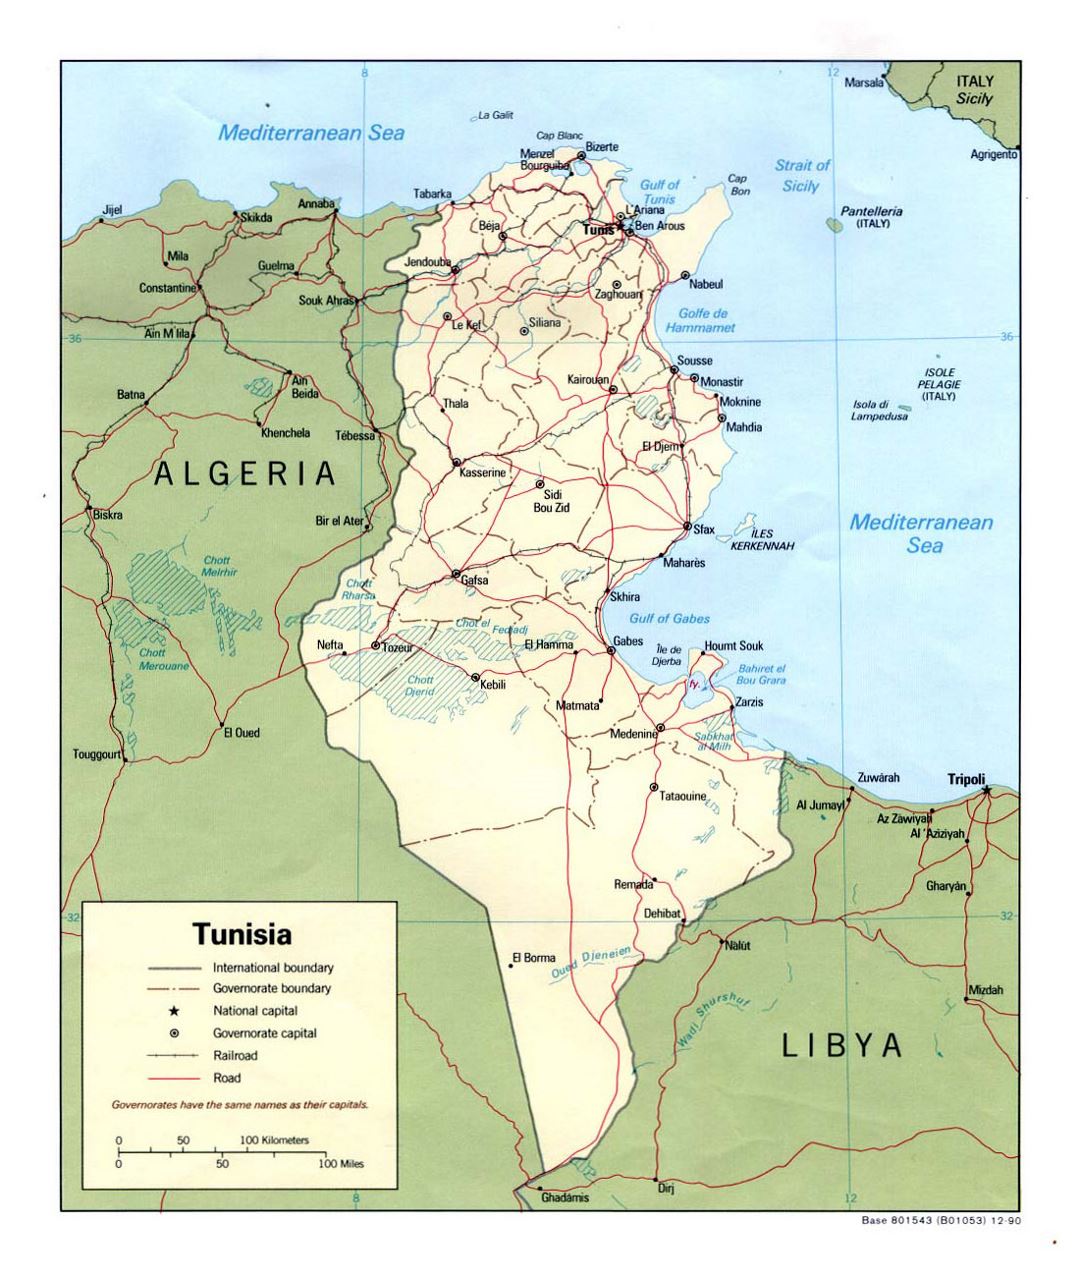 Detailed political and administrative map of Tunisia with roads, railroads and major cities - 1990